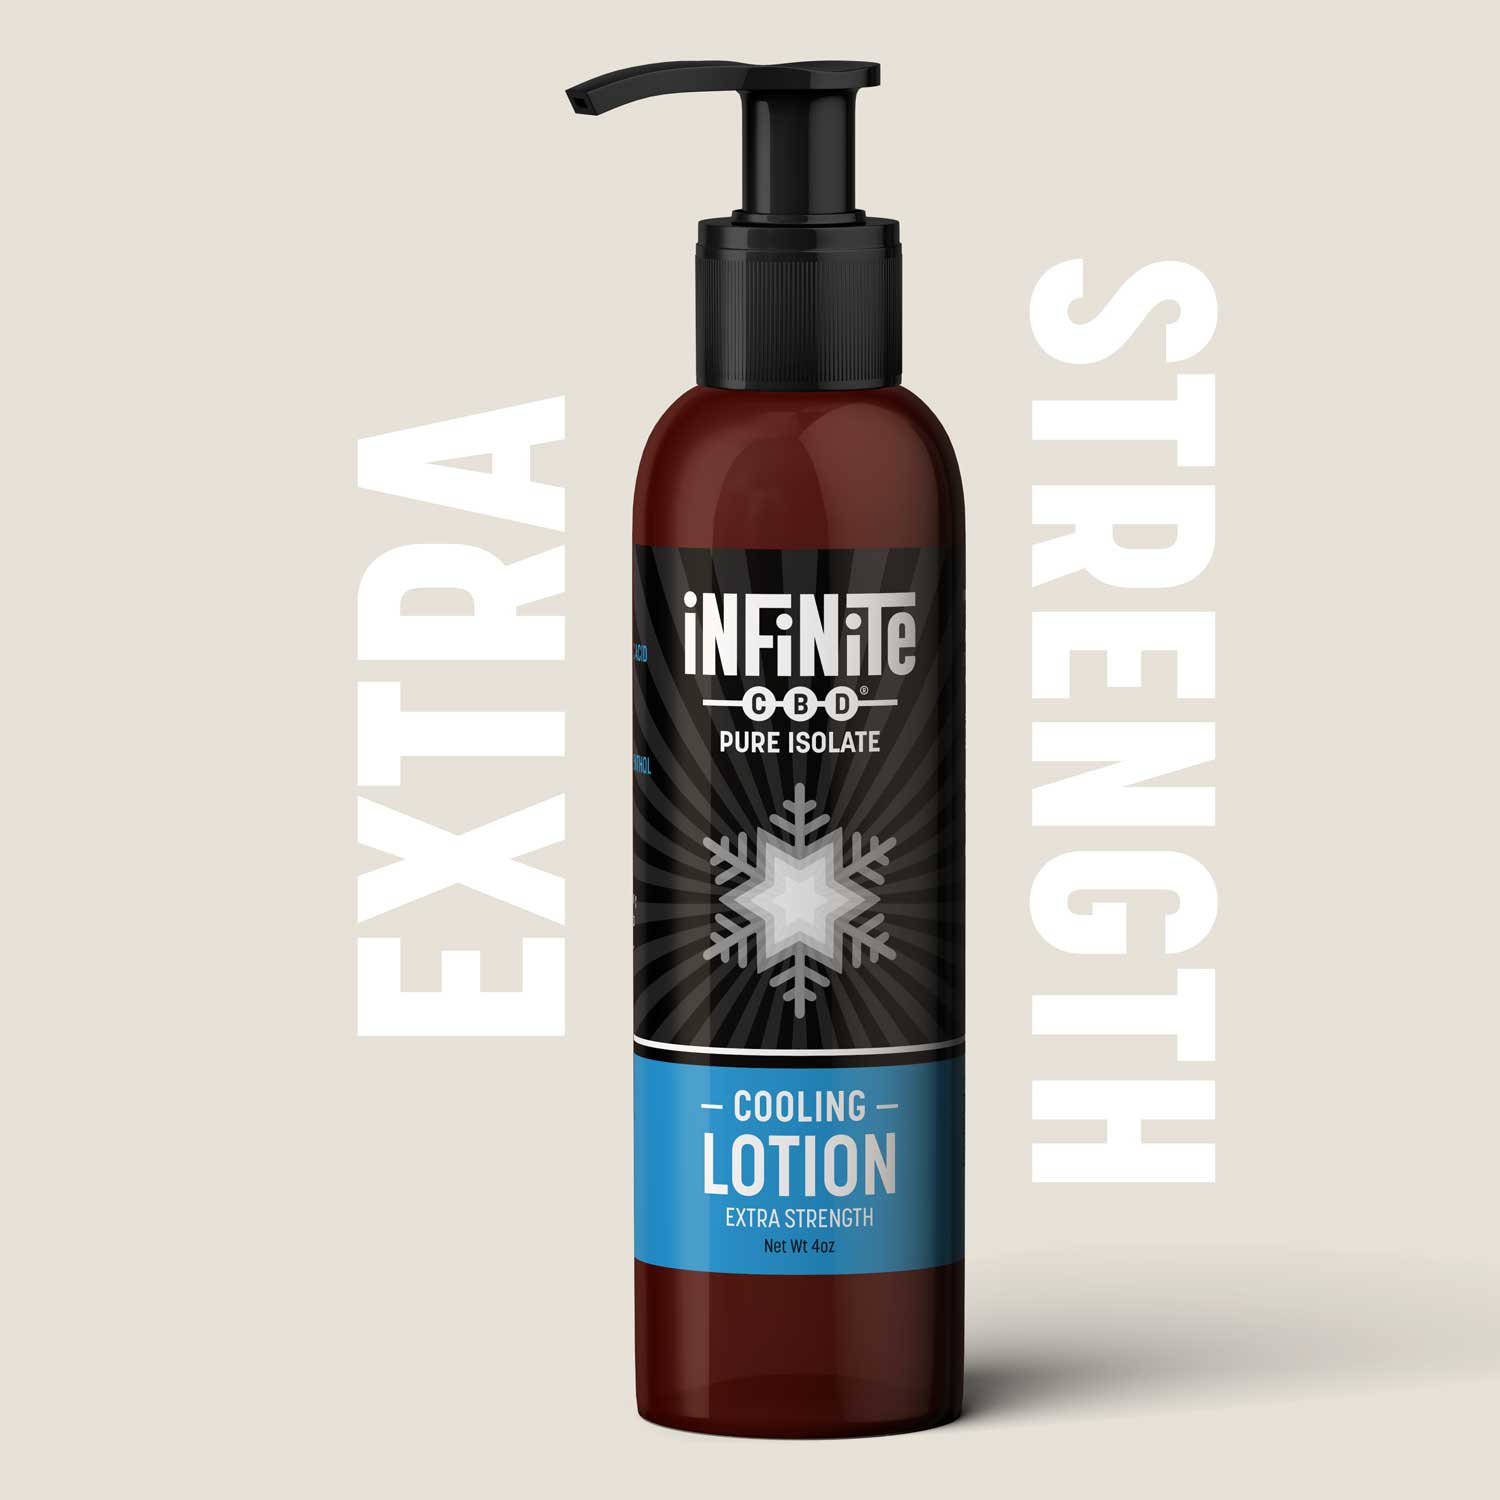 Topical Lotion<br>Formulation: Cooling<br>CBD: Pure Isolate (Zero THC)<br>Strength: Extra (1000mg/bottle)